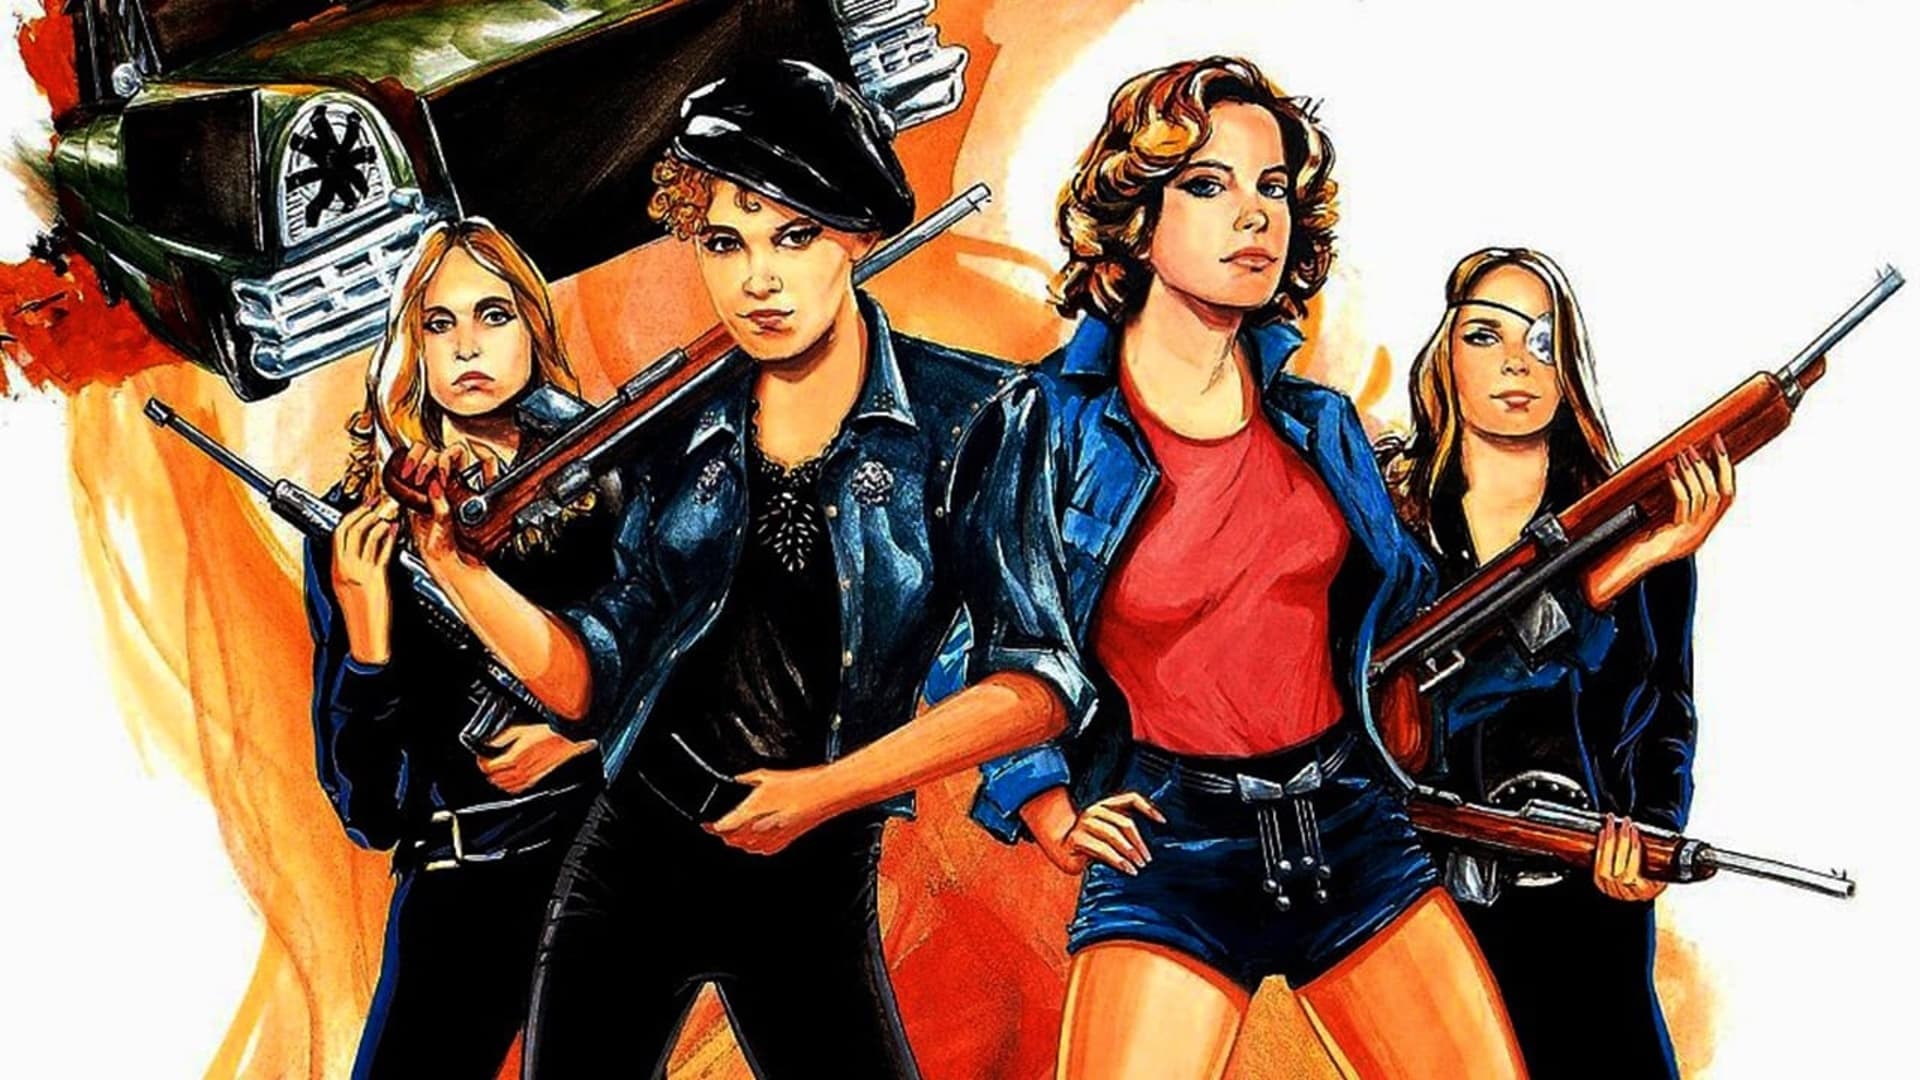 Switchblade Sisters (1975)